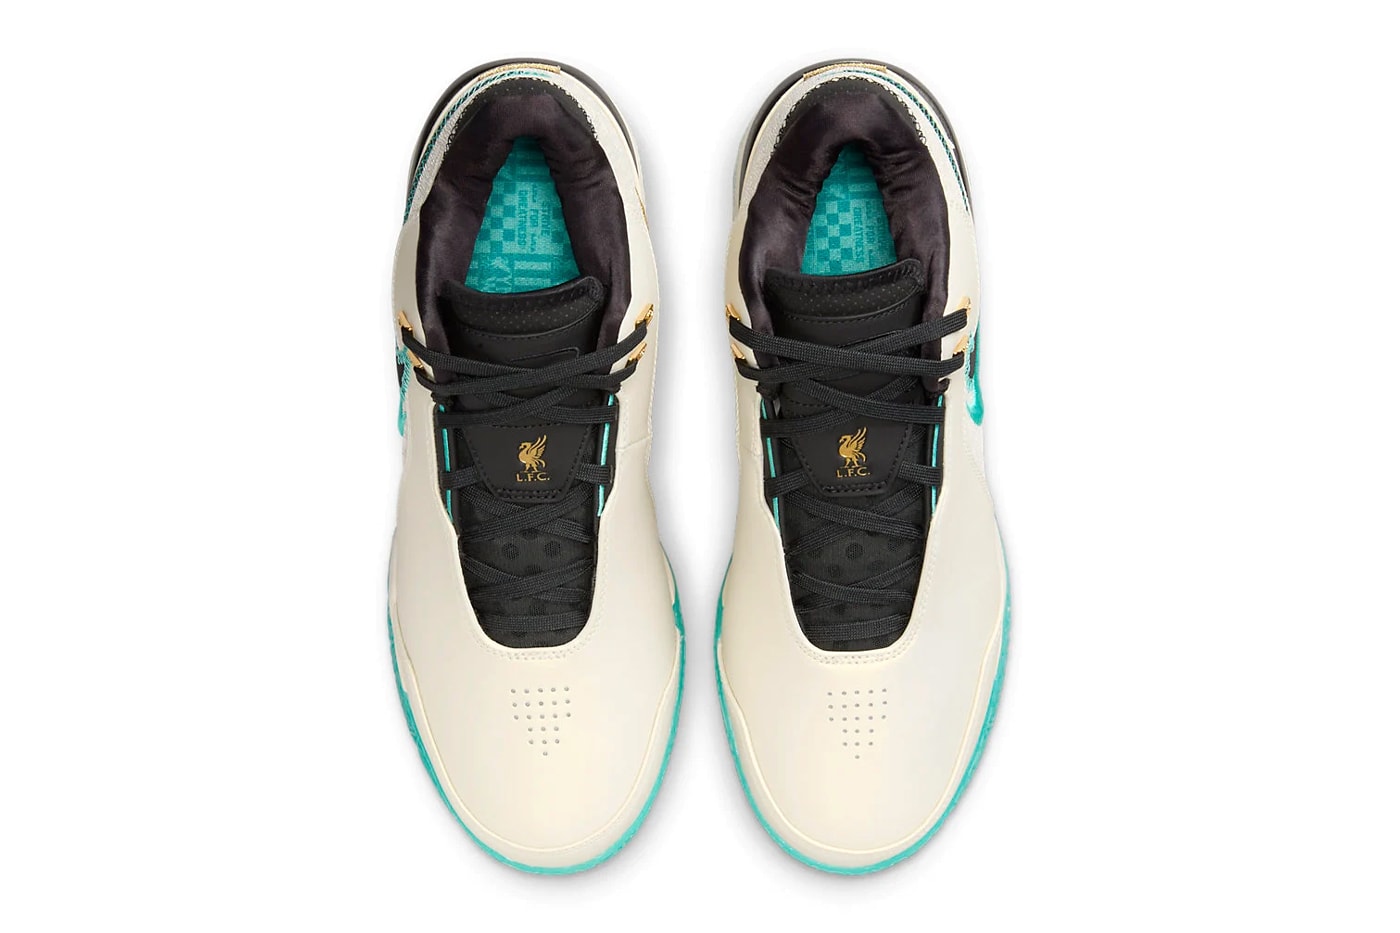 Official Look at the Liverpool FC x Nike LeBron NXXT Gen AMPD Release FJ1566-101 lebron james king james basketball shoes swoosh Light Orewood Brown/Washed Teal-Metallic Gold-Black info